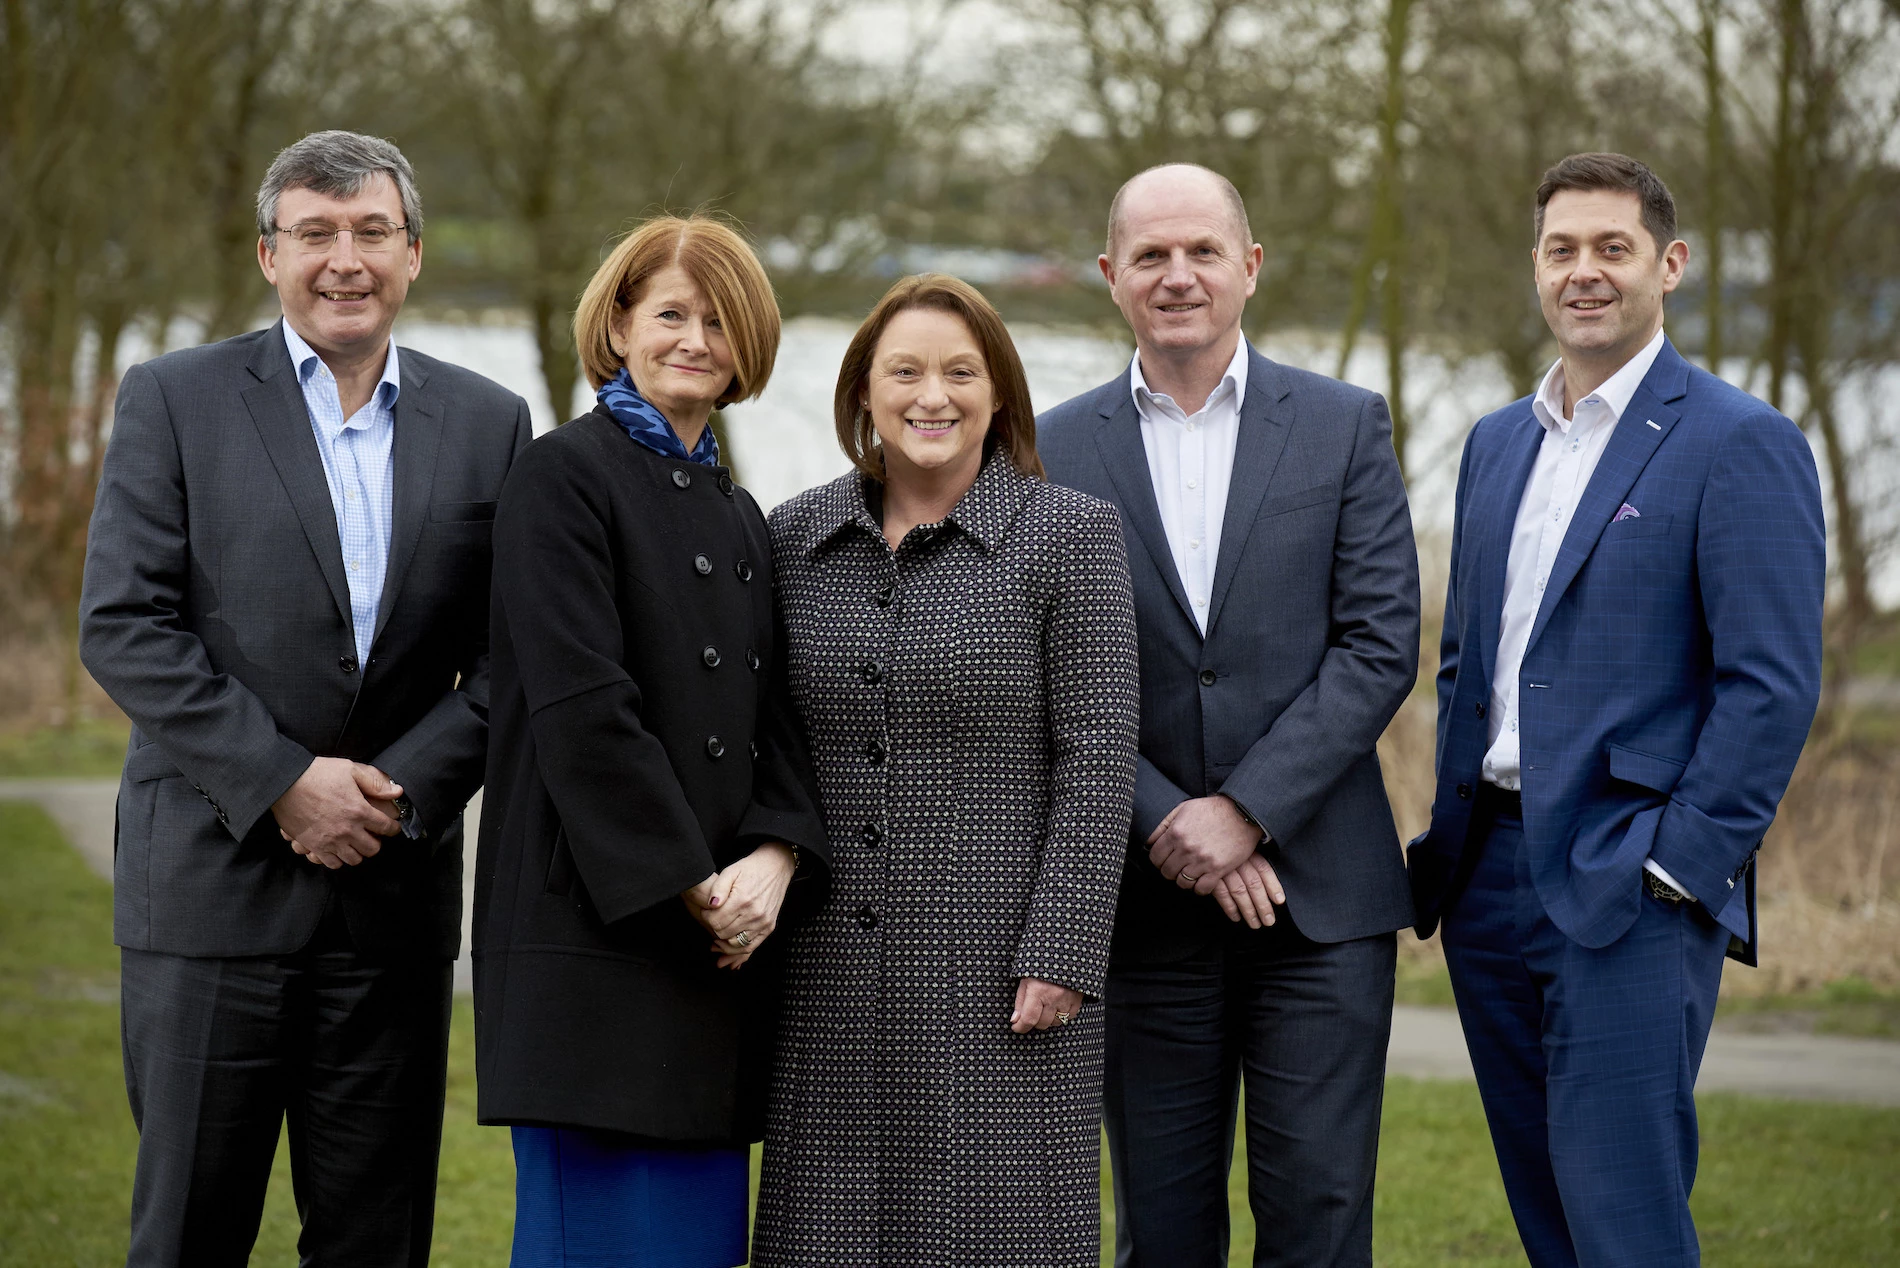 Mark Christopher, Head of Residential Sales at Linley & Simpson;  Christine Hands and Anita Marwood from Acorn Estates; and Linley & Simpson founding directors Will Linley and Nick Simpson.